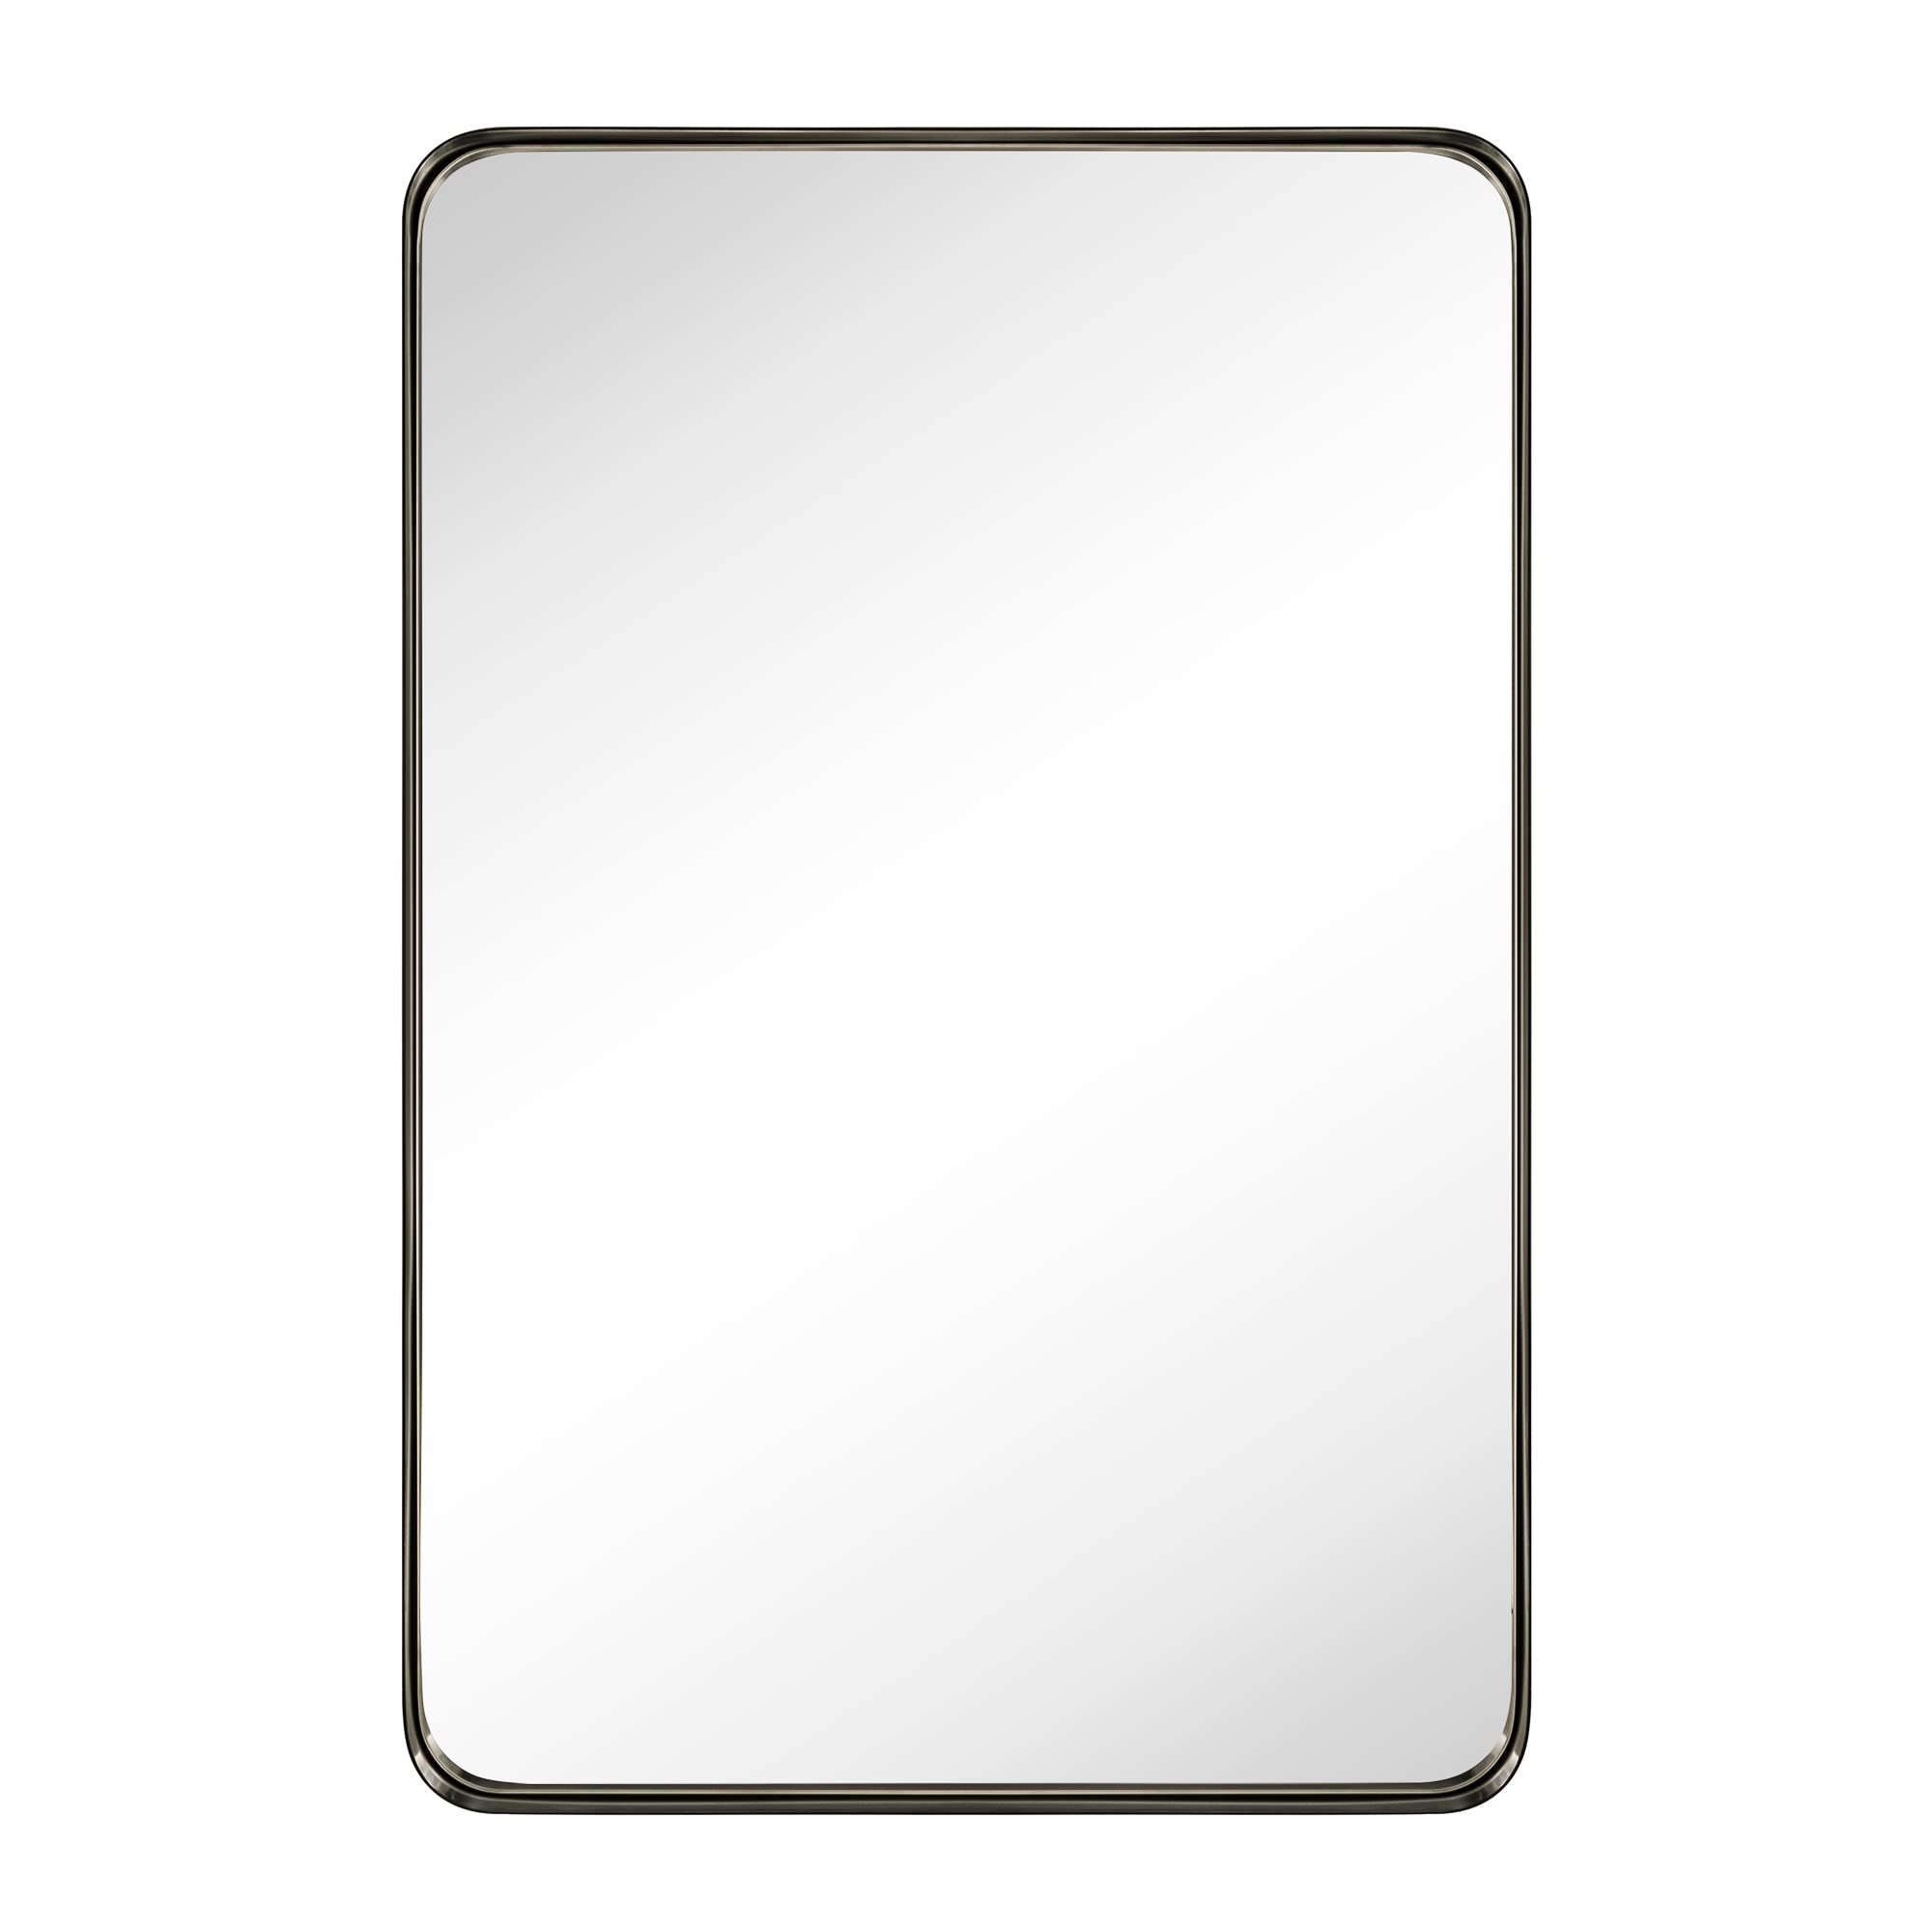 Arthers Rectangle Metal Wall Mirror-24x36-Oil Rubbed Bronze